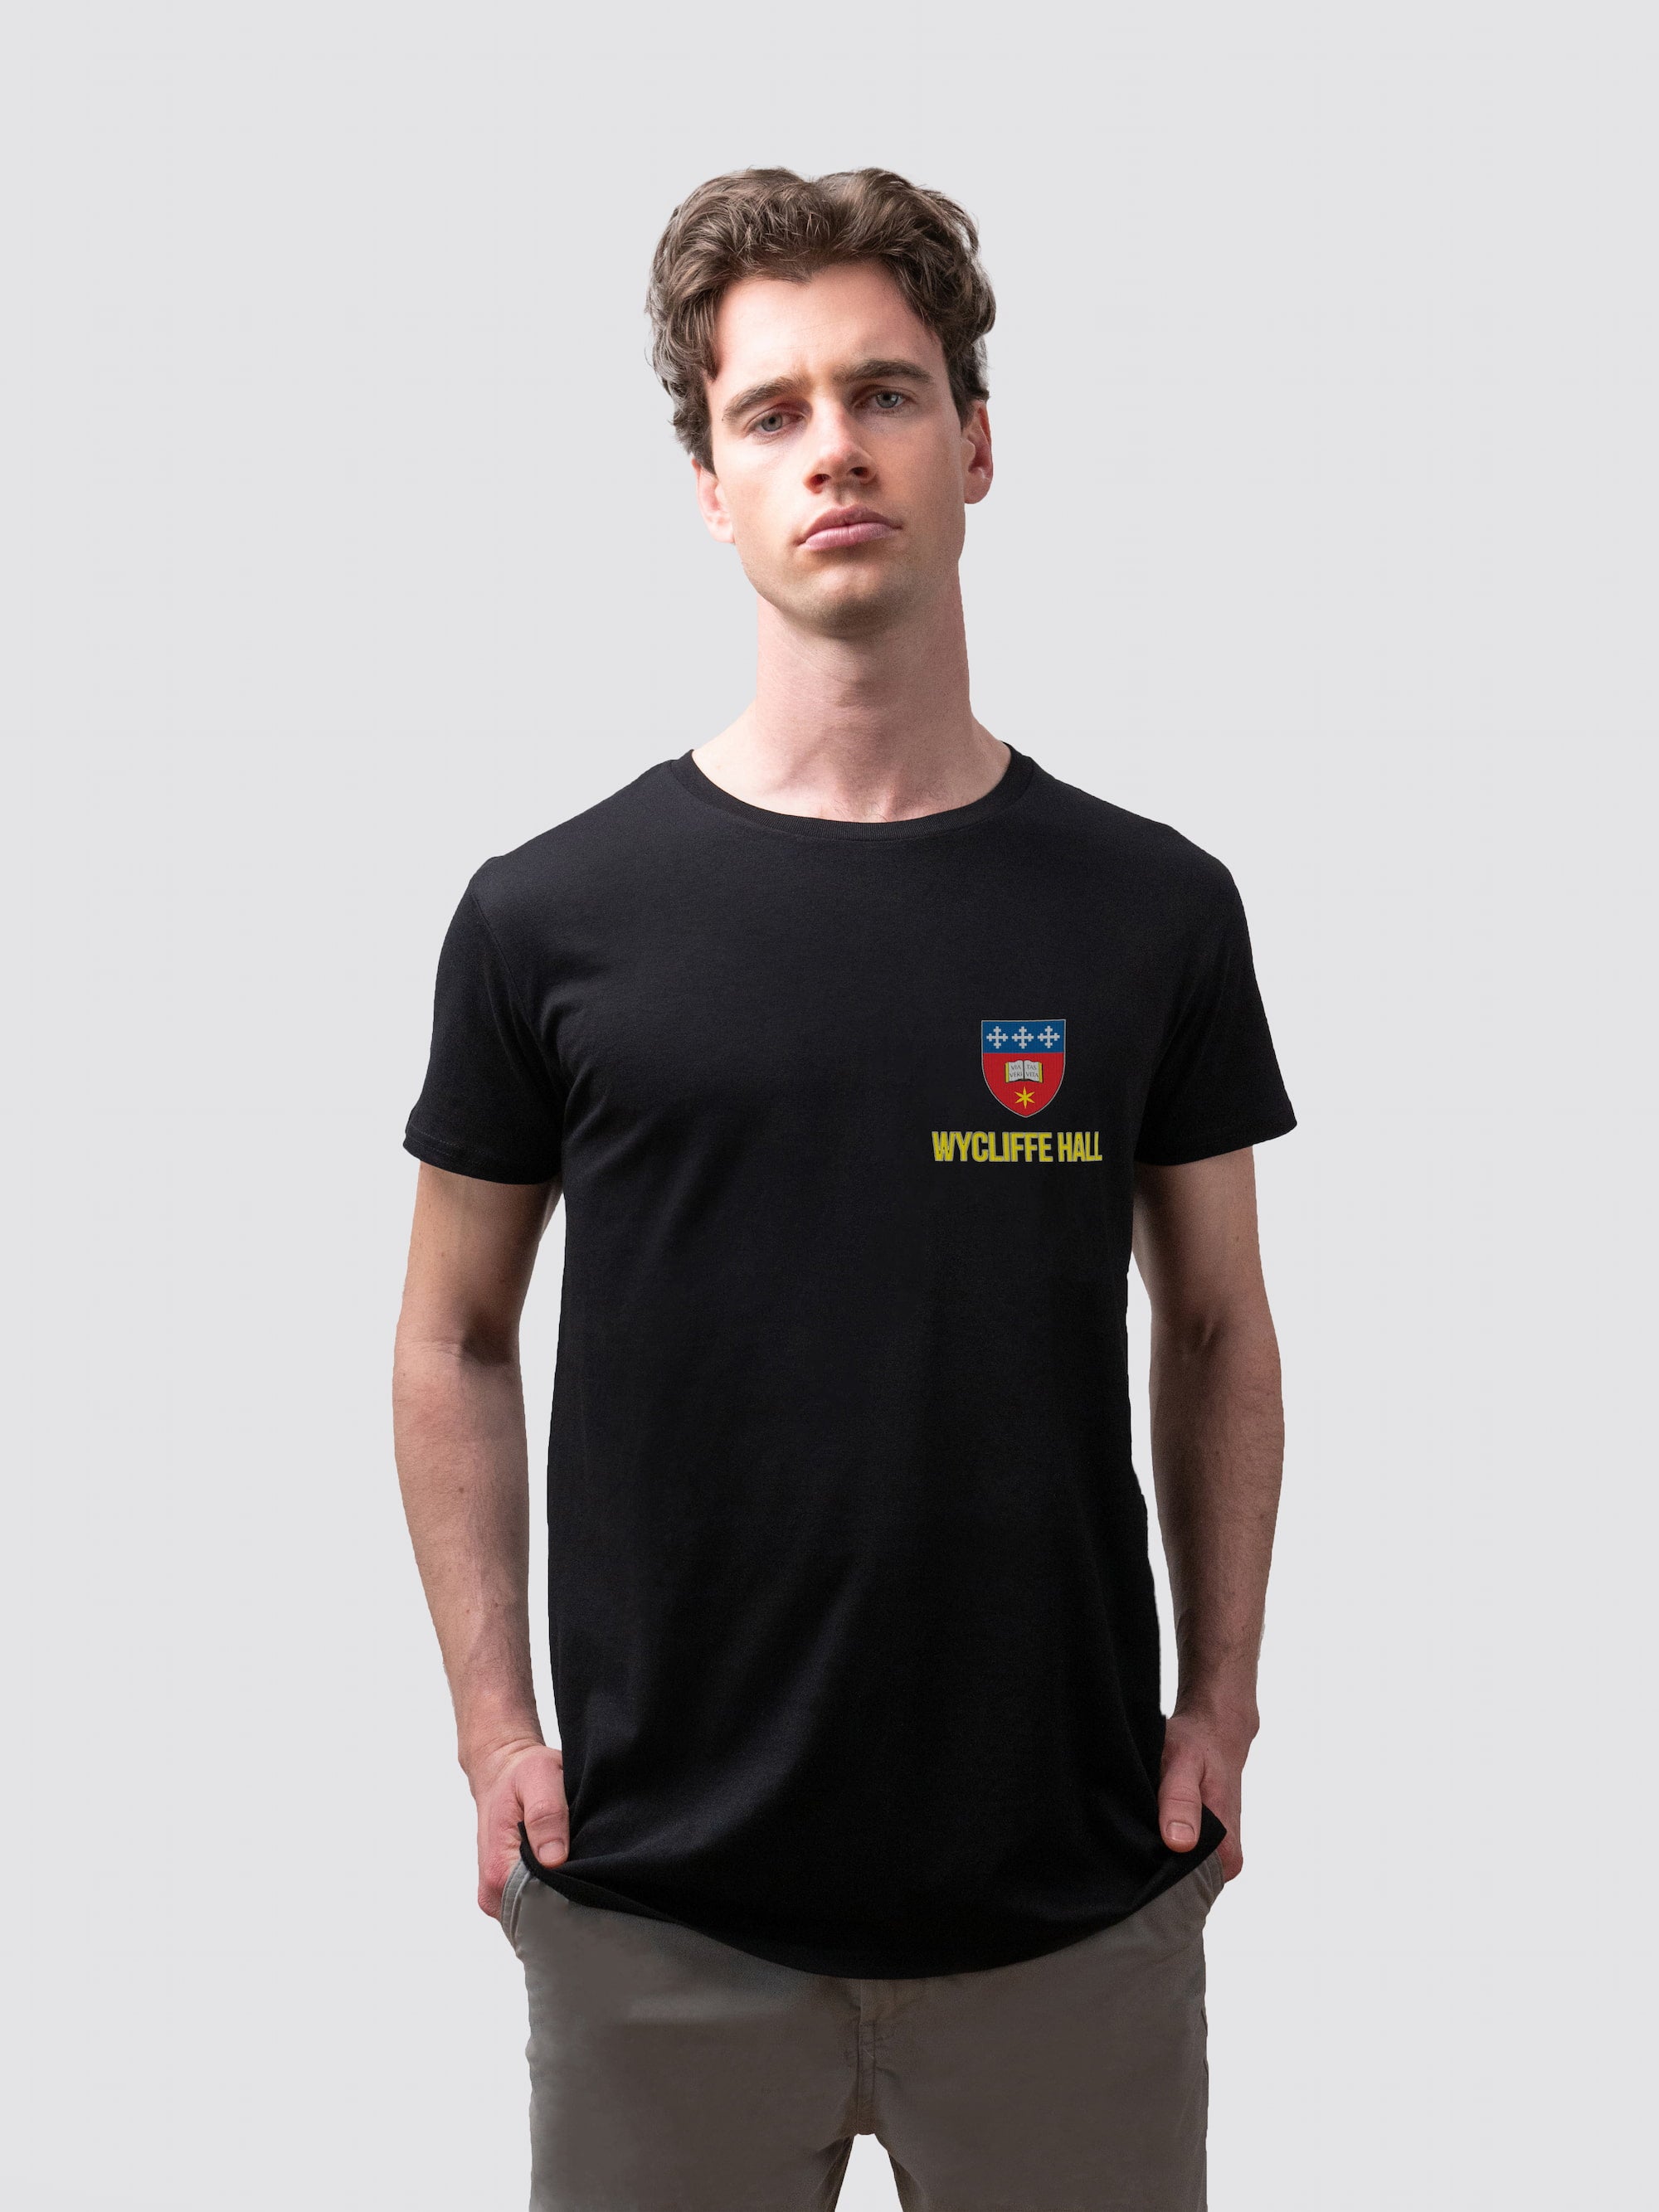 Sustainable Wycliffe Hall t-shirt, made from organic cotton 